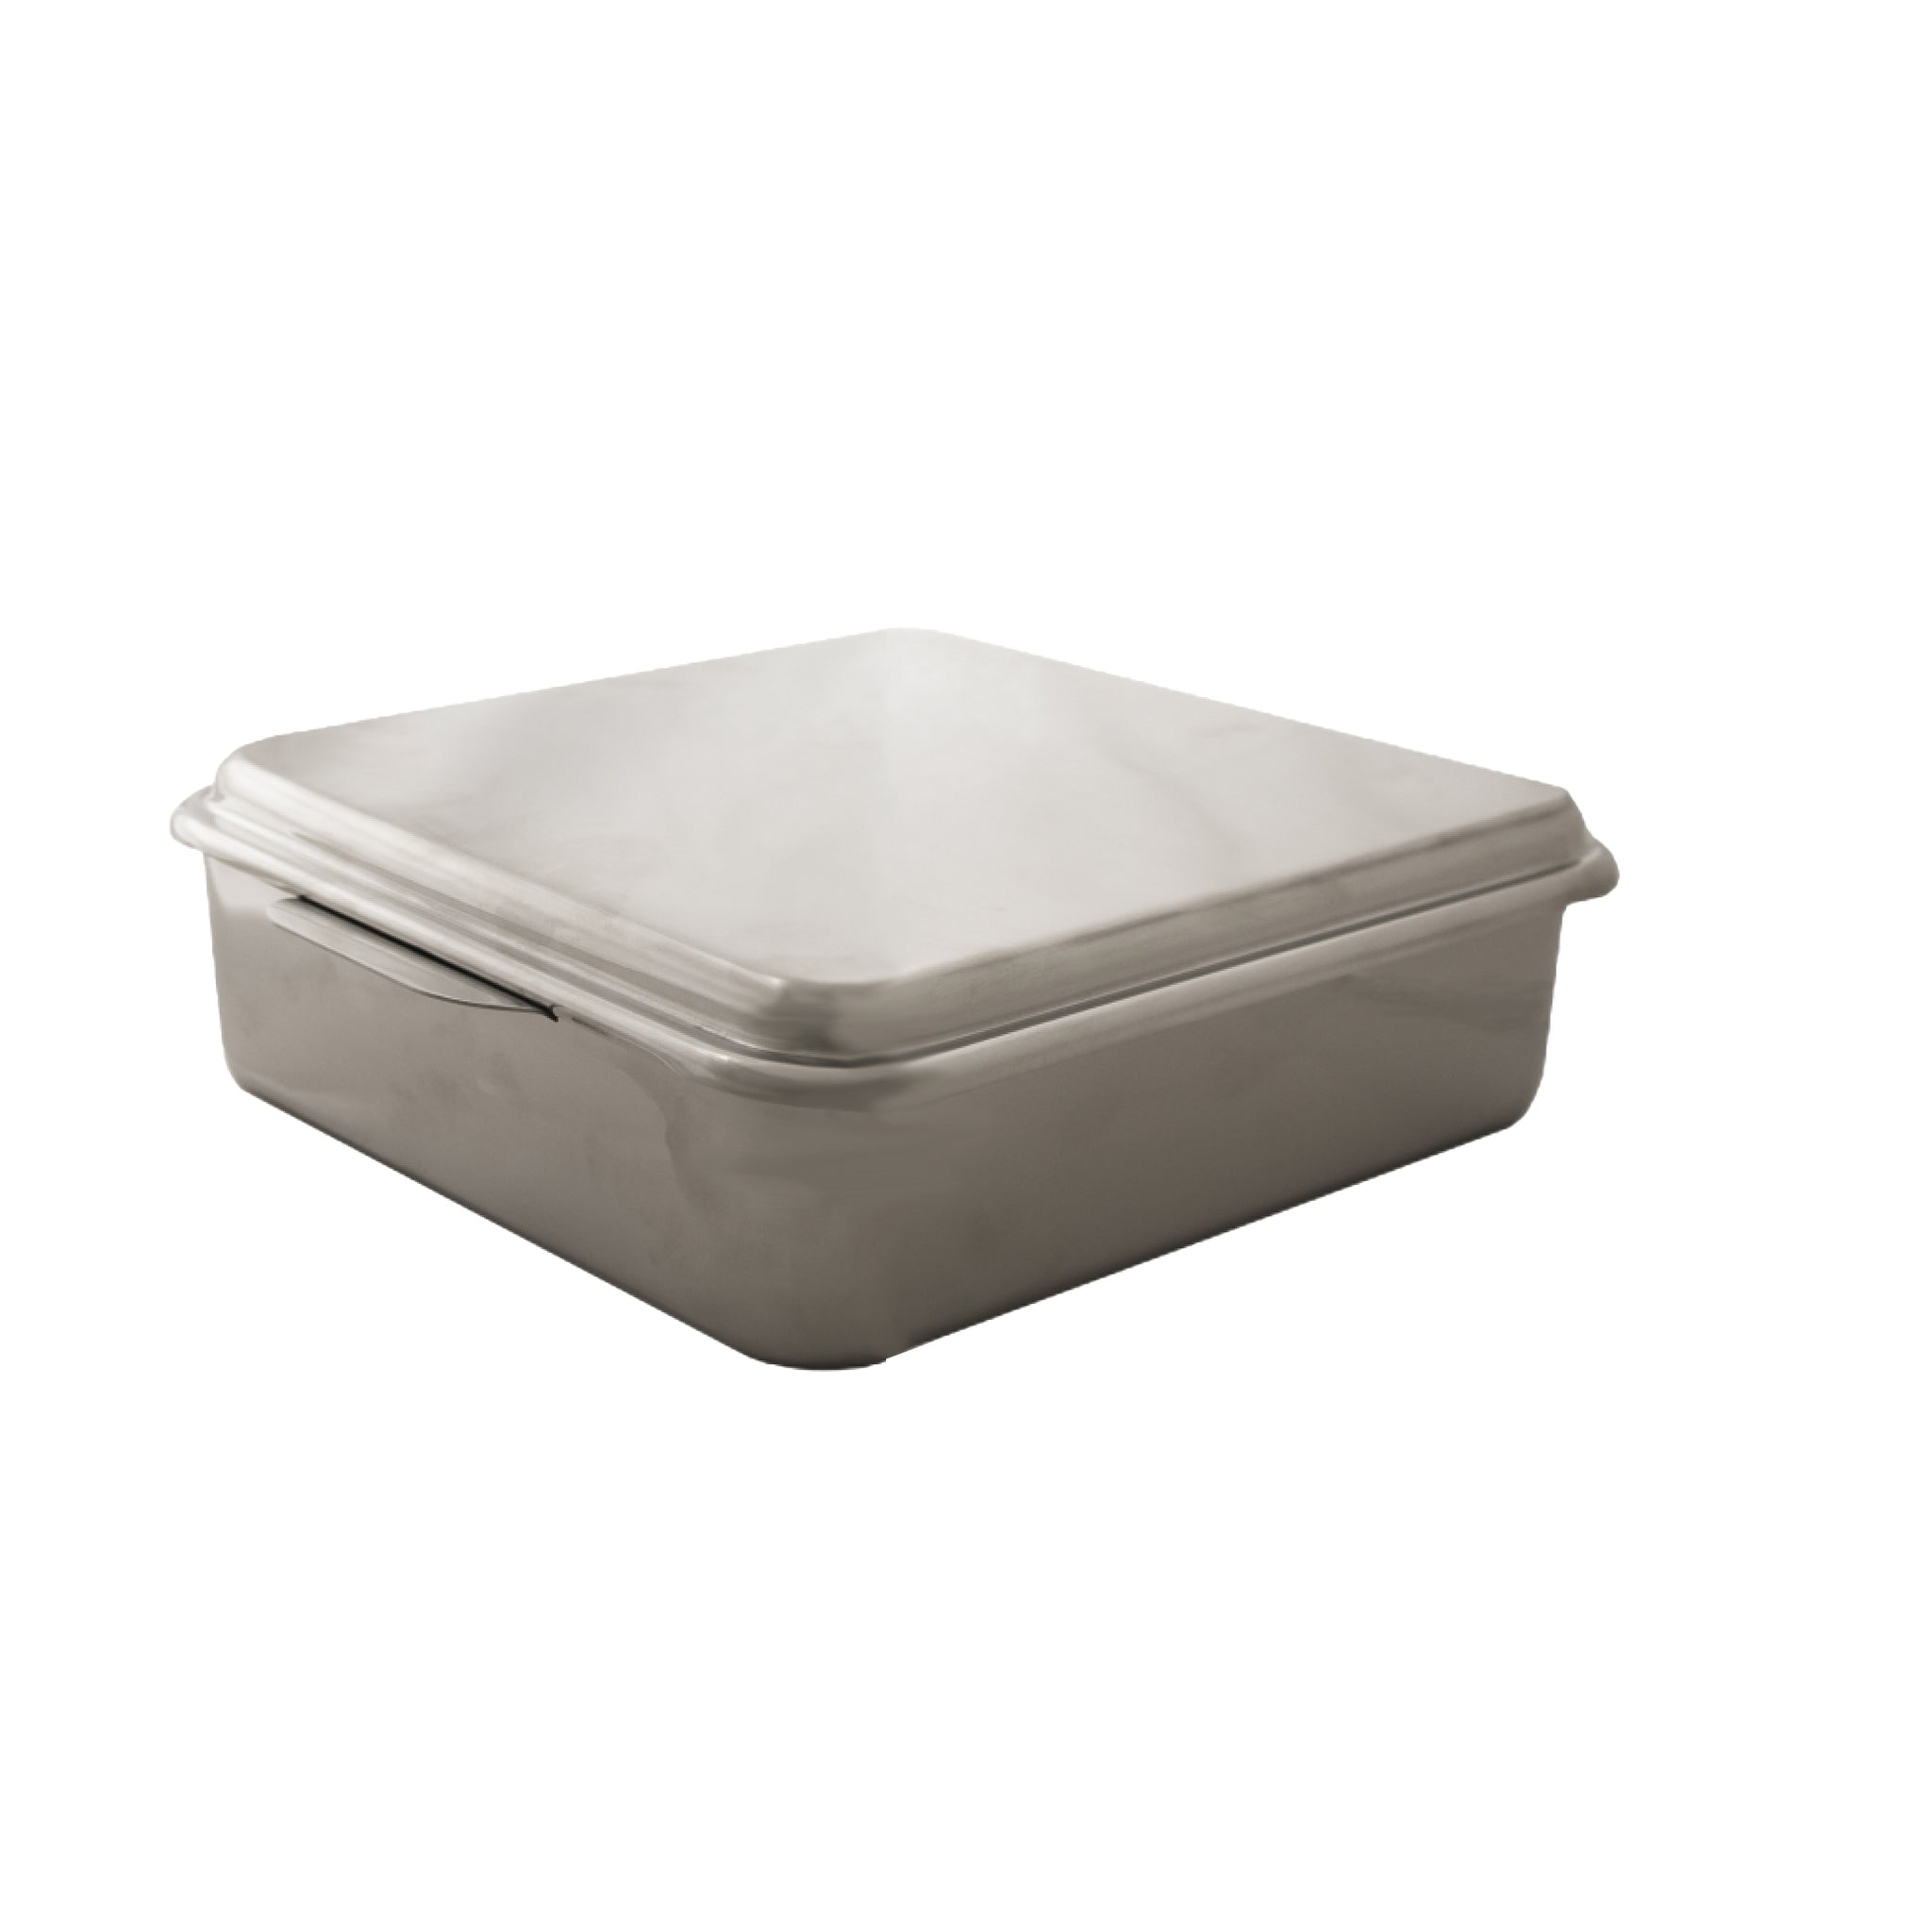 Nordic Ware 9 Square Cake Pan with Lid